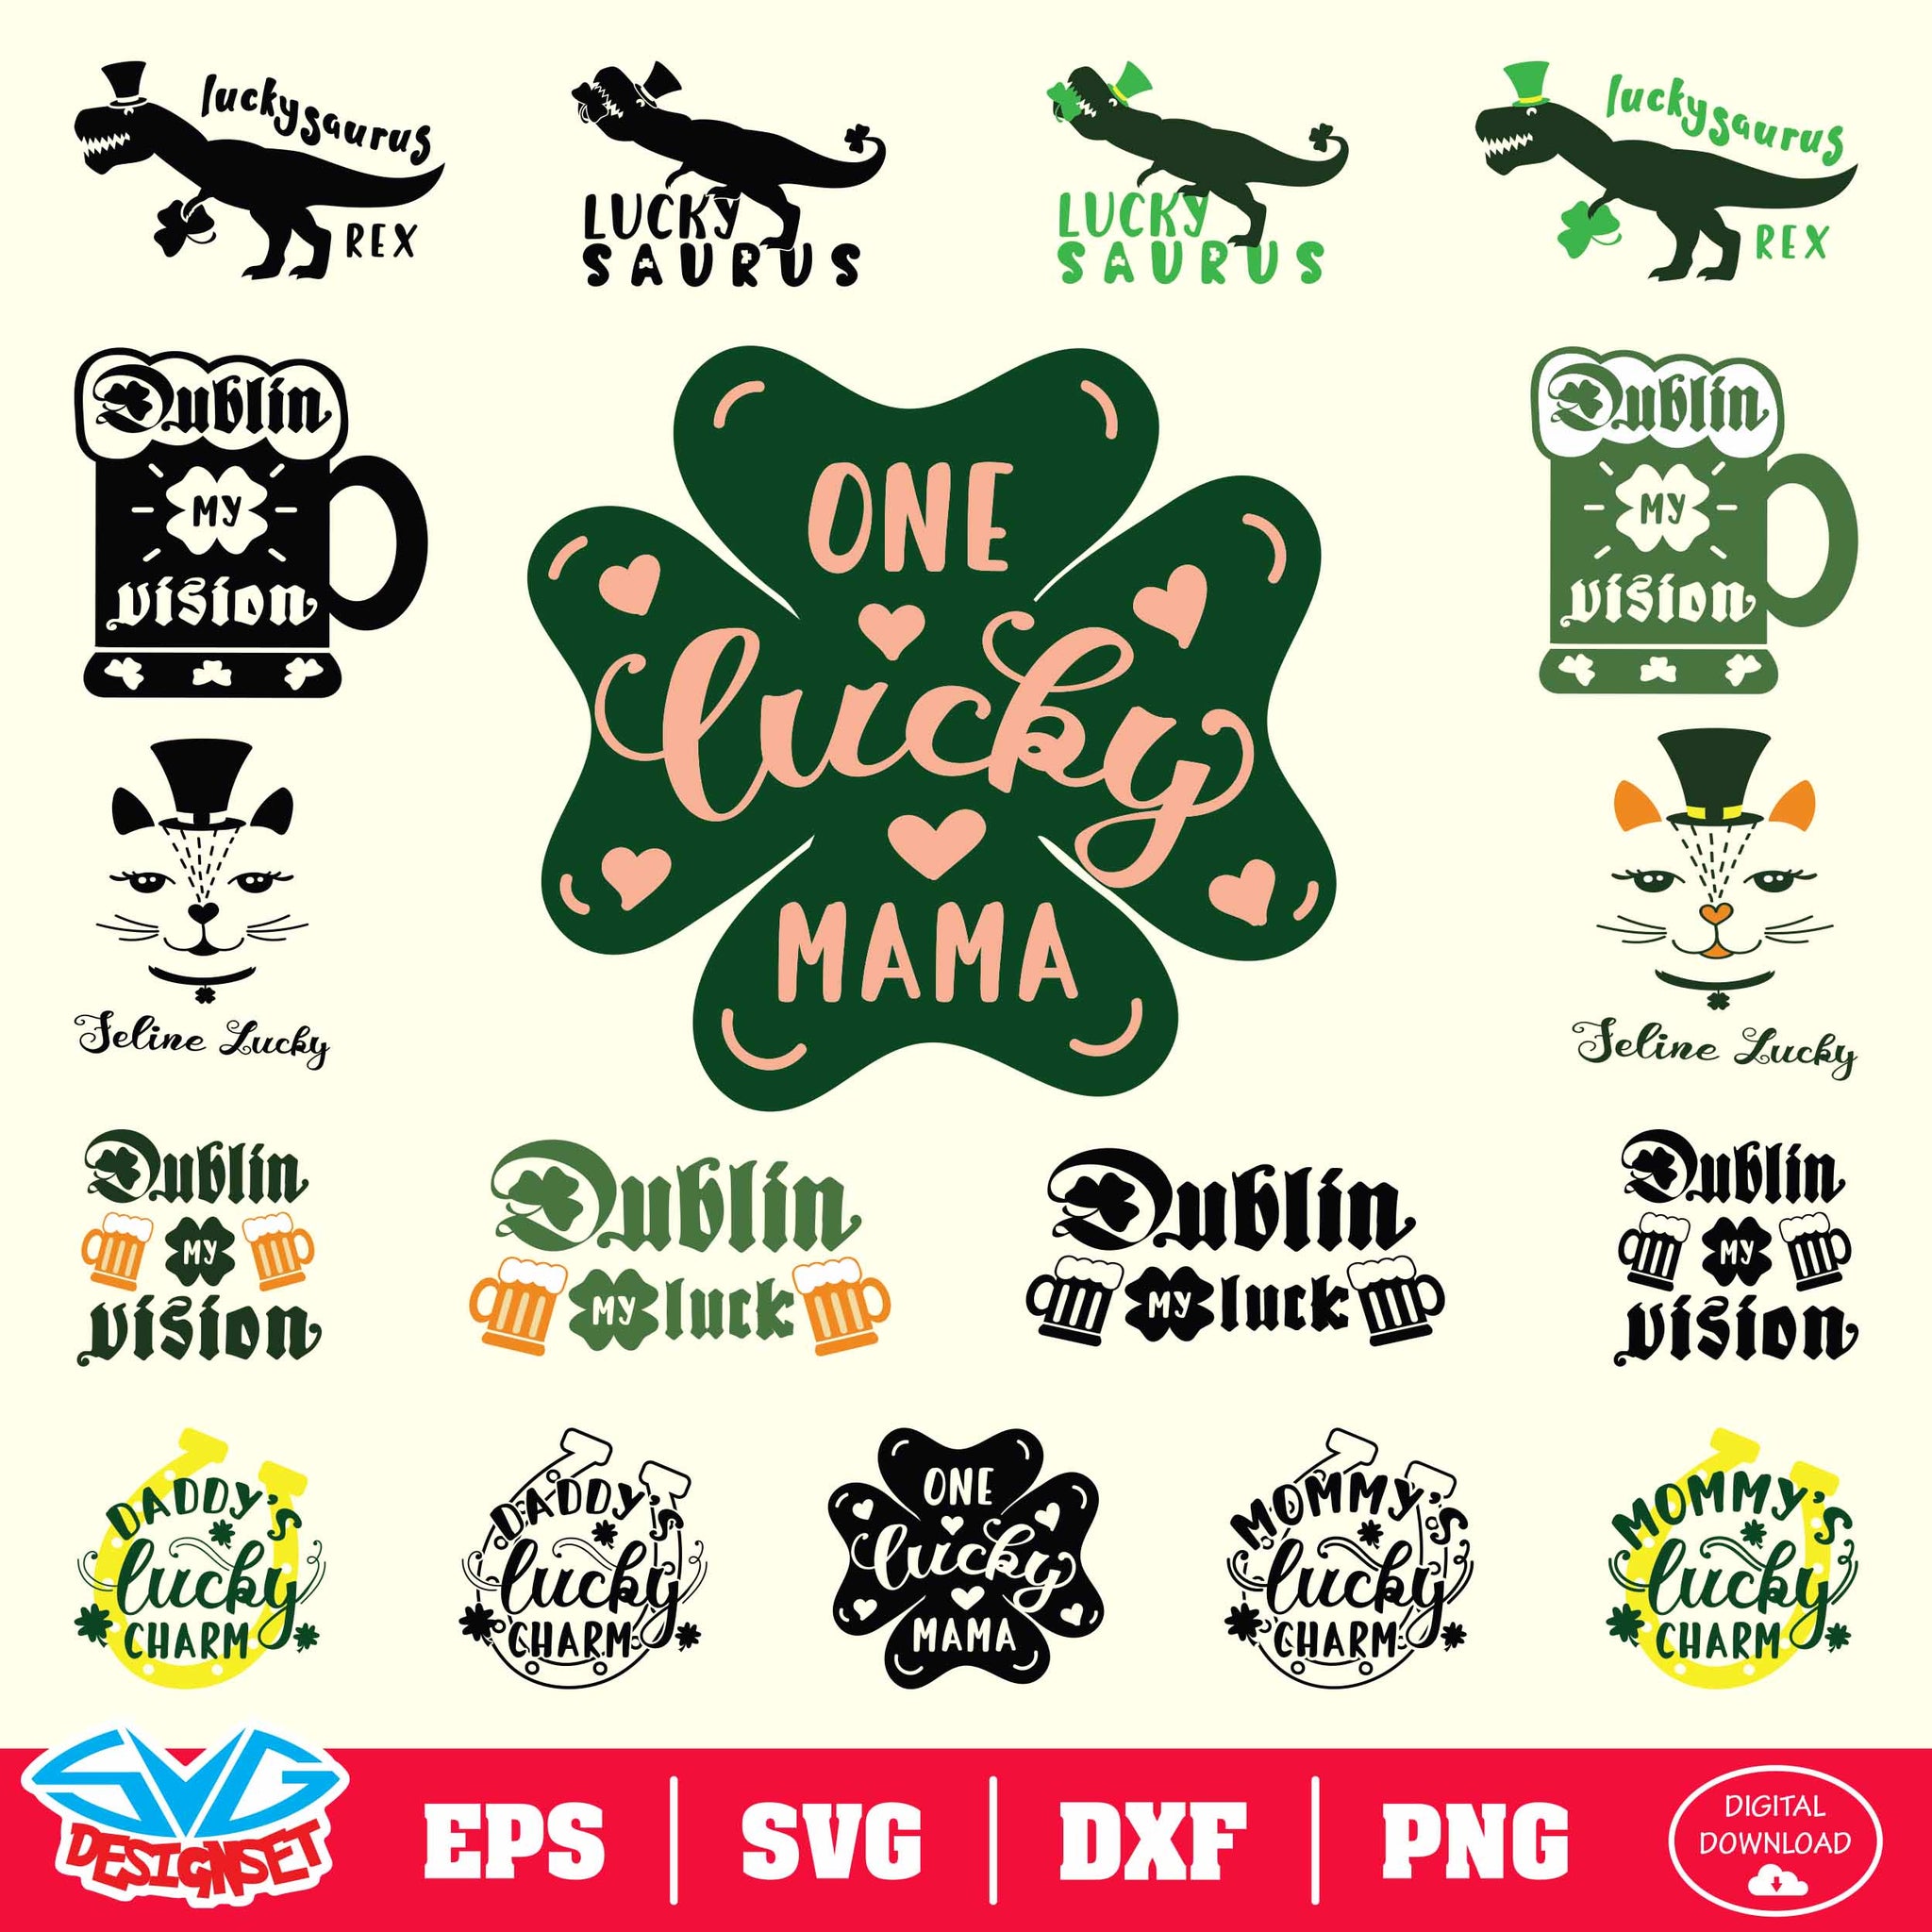 St. Patrick's Day Bundle Svg, Dxf, Eps, Png, Clipart, Silhouette and Cutfiles #006 - SVGDesignSets